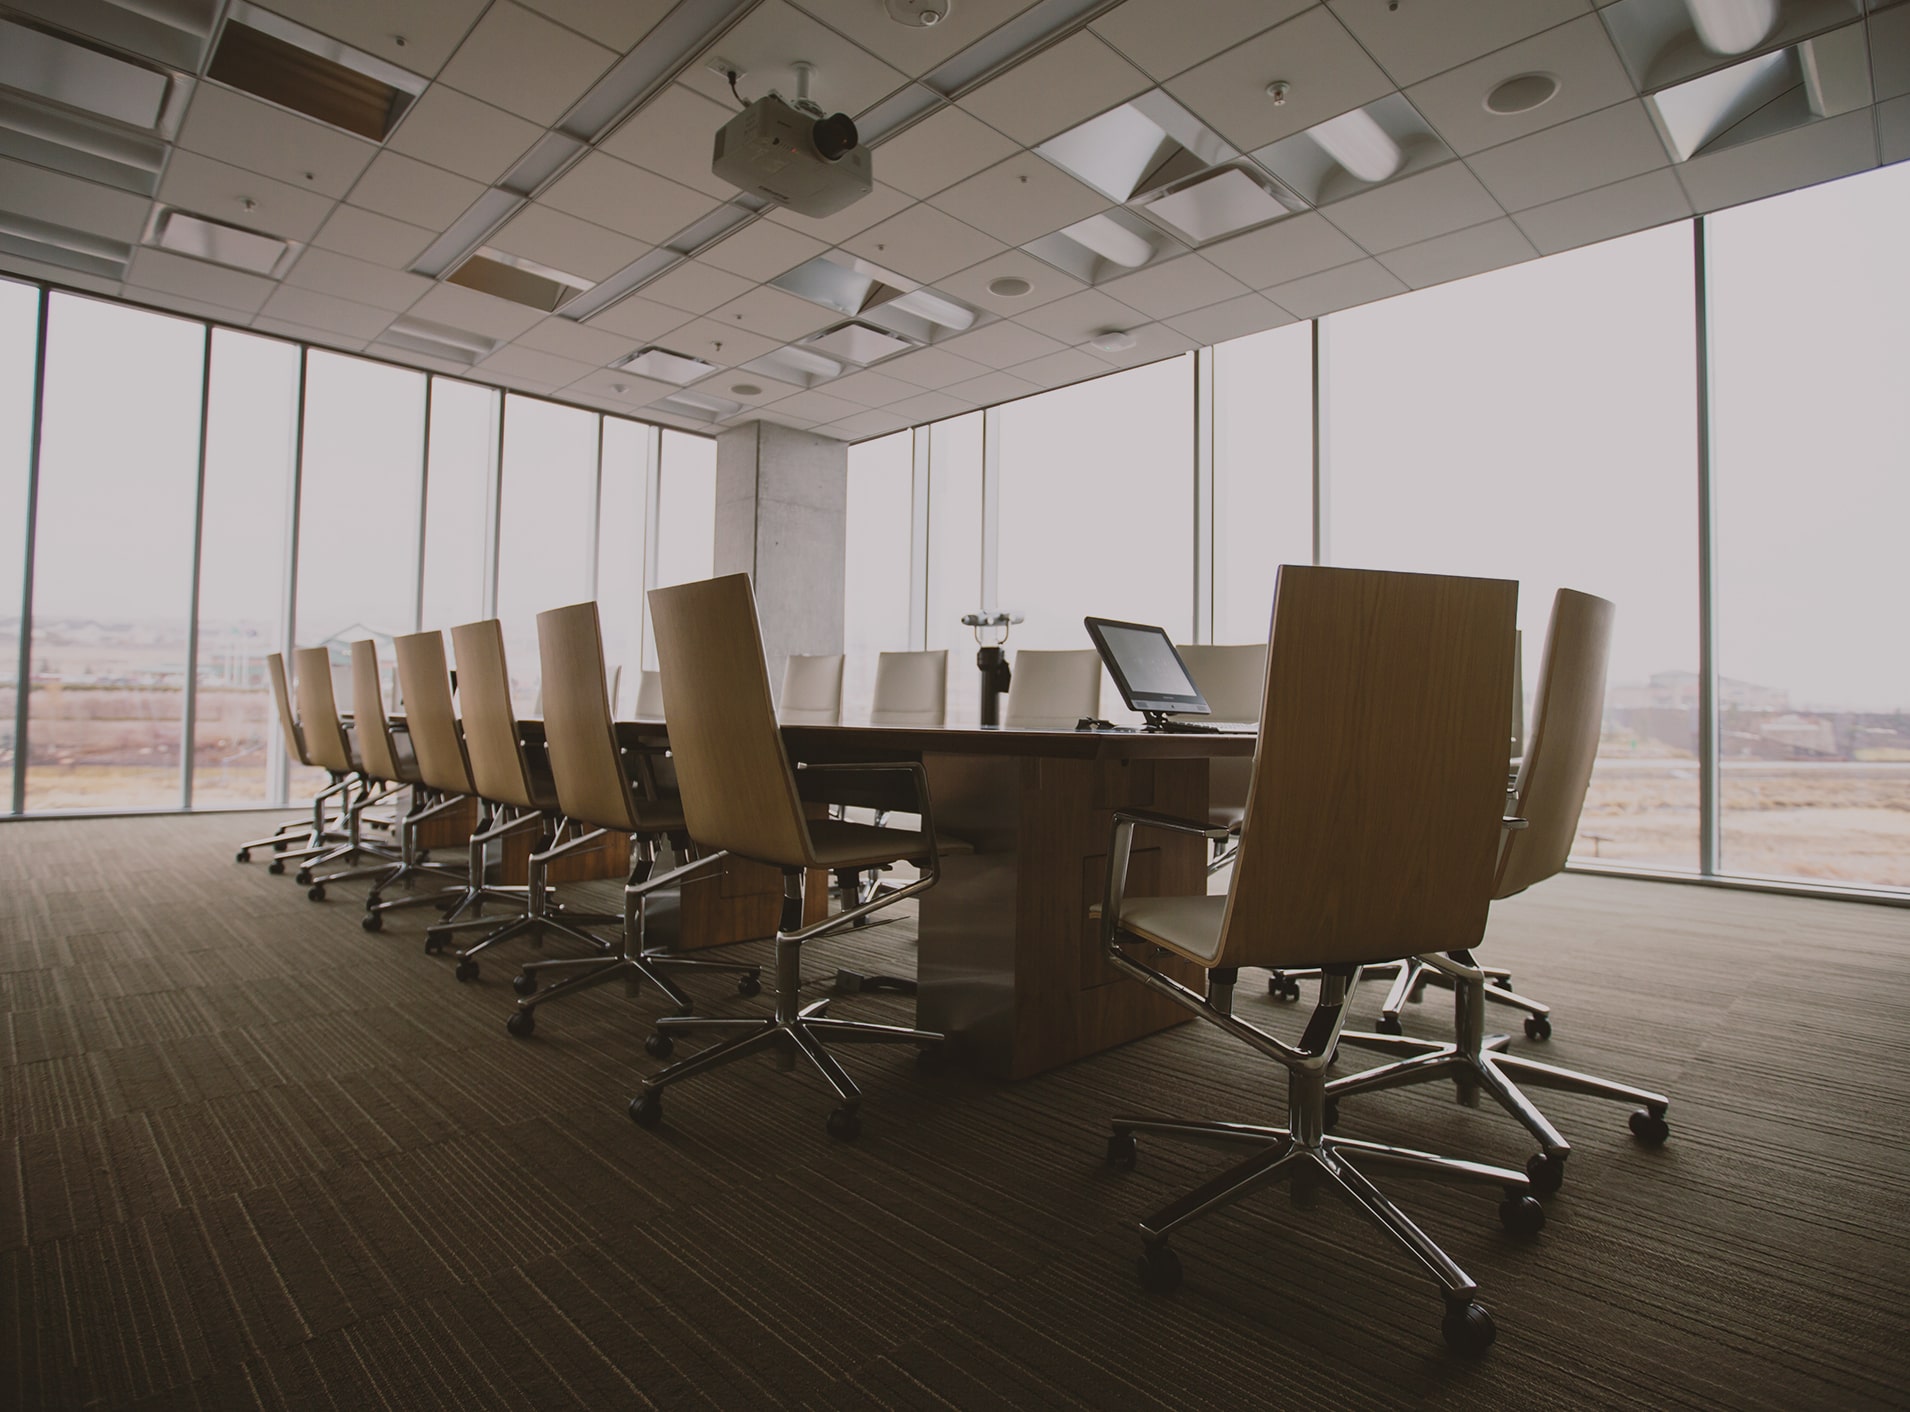 The featured image is a board room with multiple chairs. Click to learn more about Weyco and its relevant investor information.